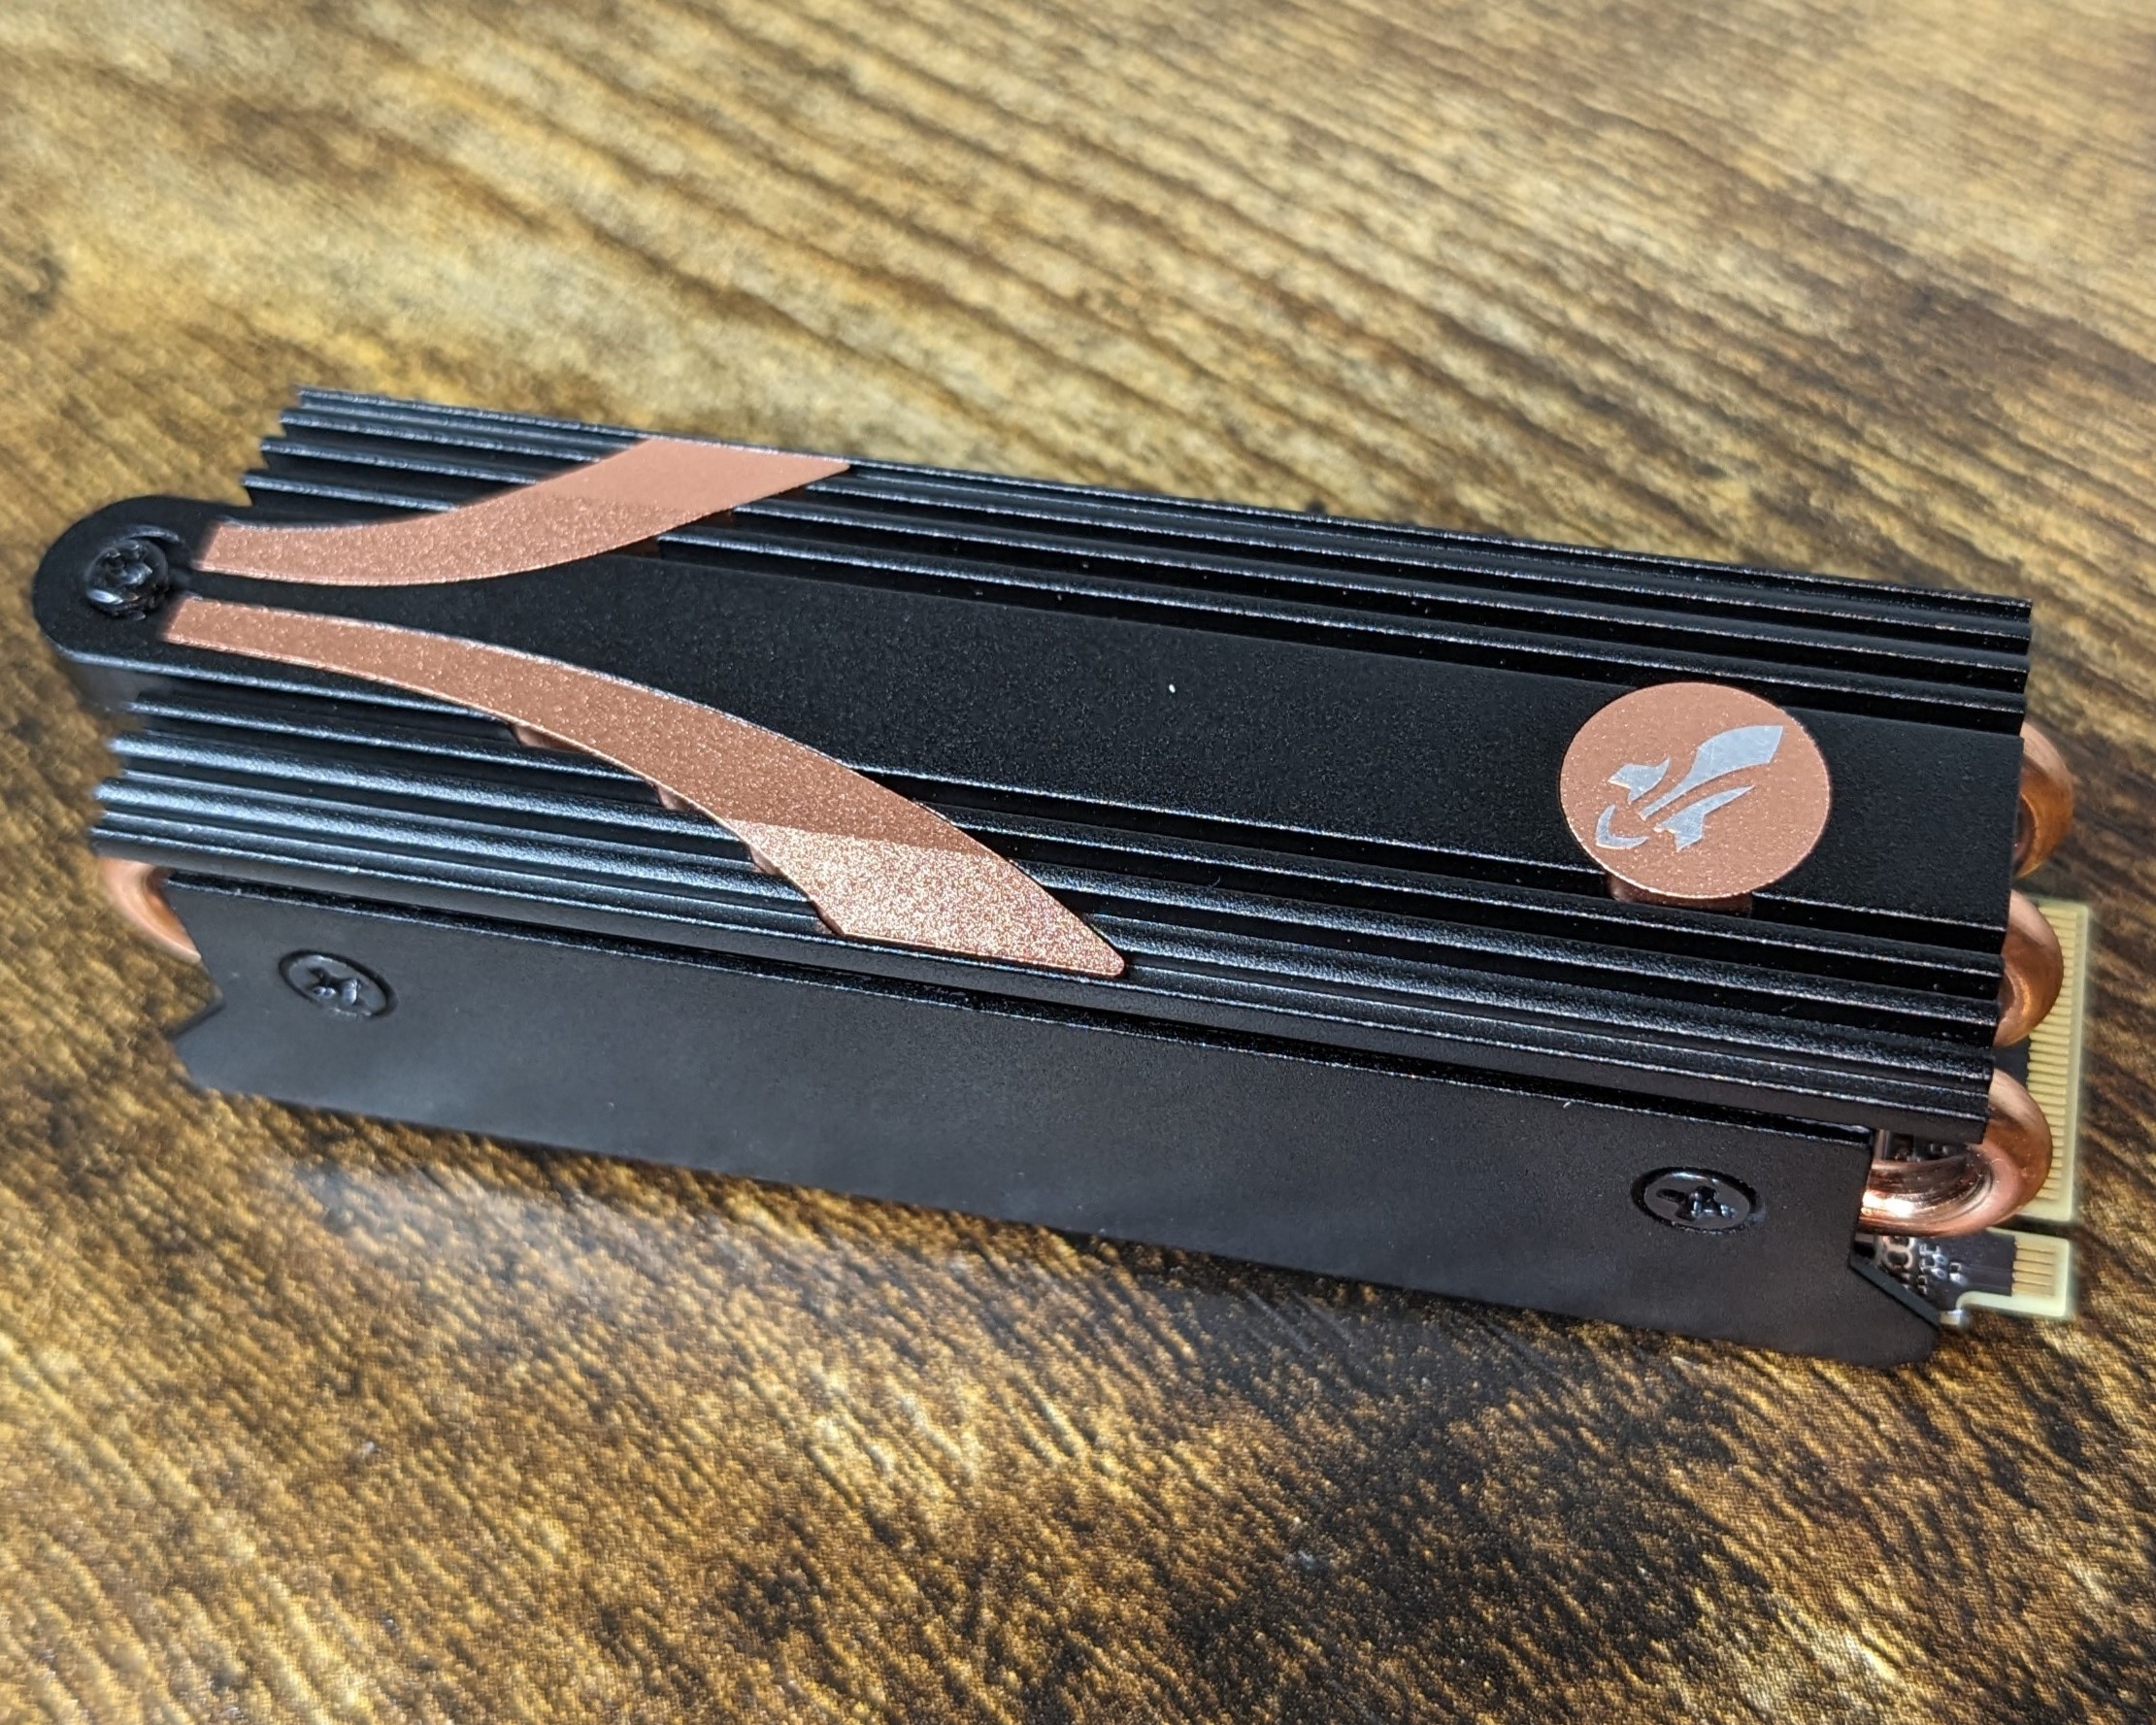 Sabrent Rocket SB-HTSP NVMe m.2 heatsink review: Slim profile, 3 heatpipes, and no compatibility issues!